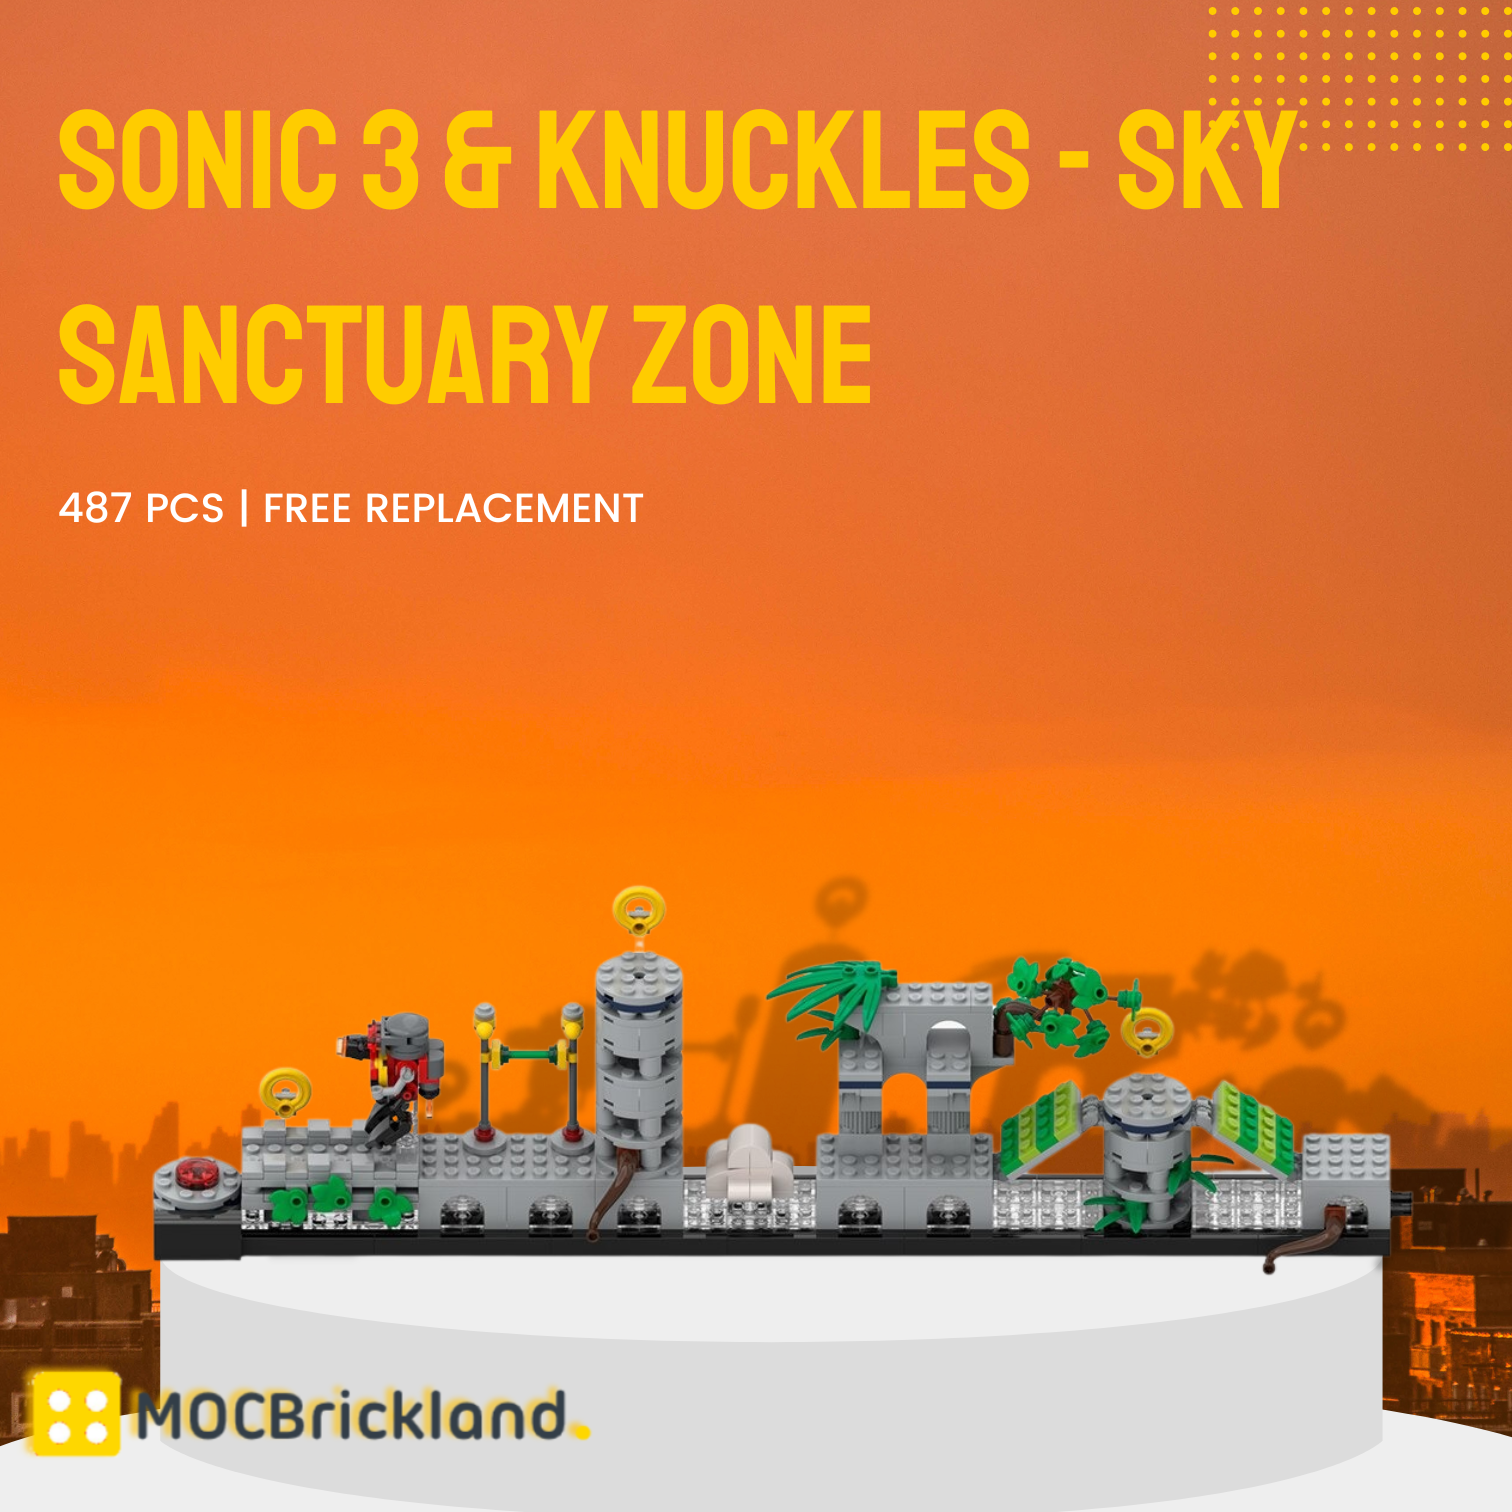 Sonic 3 & Knuckles - Sky Sanctuary Zone MOC-114363 Creator With 487 Pieces